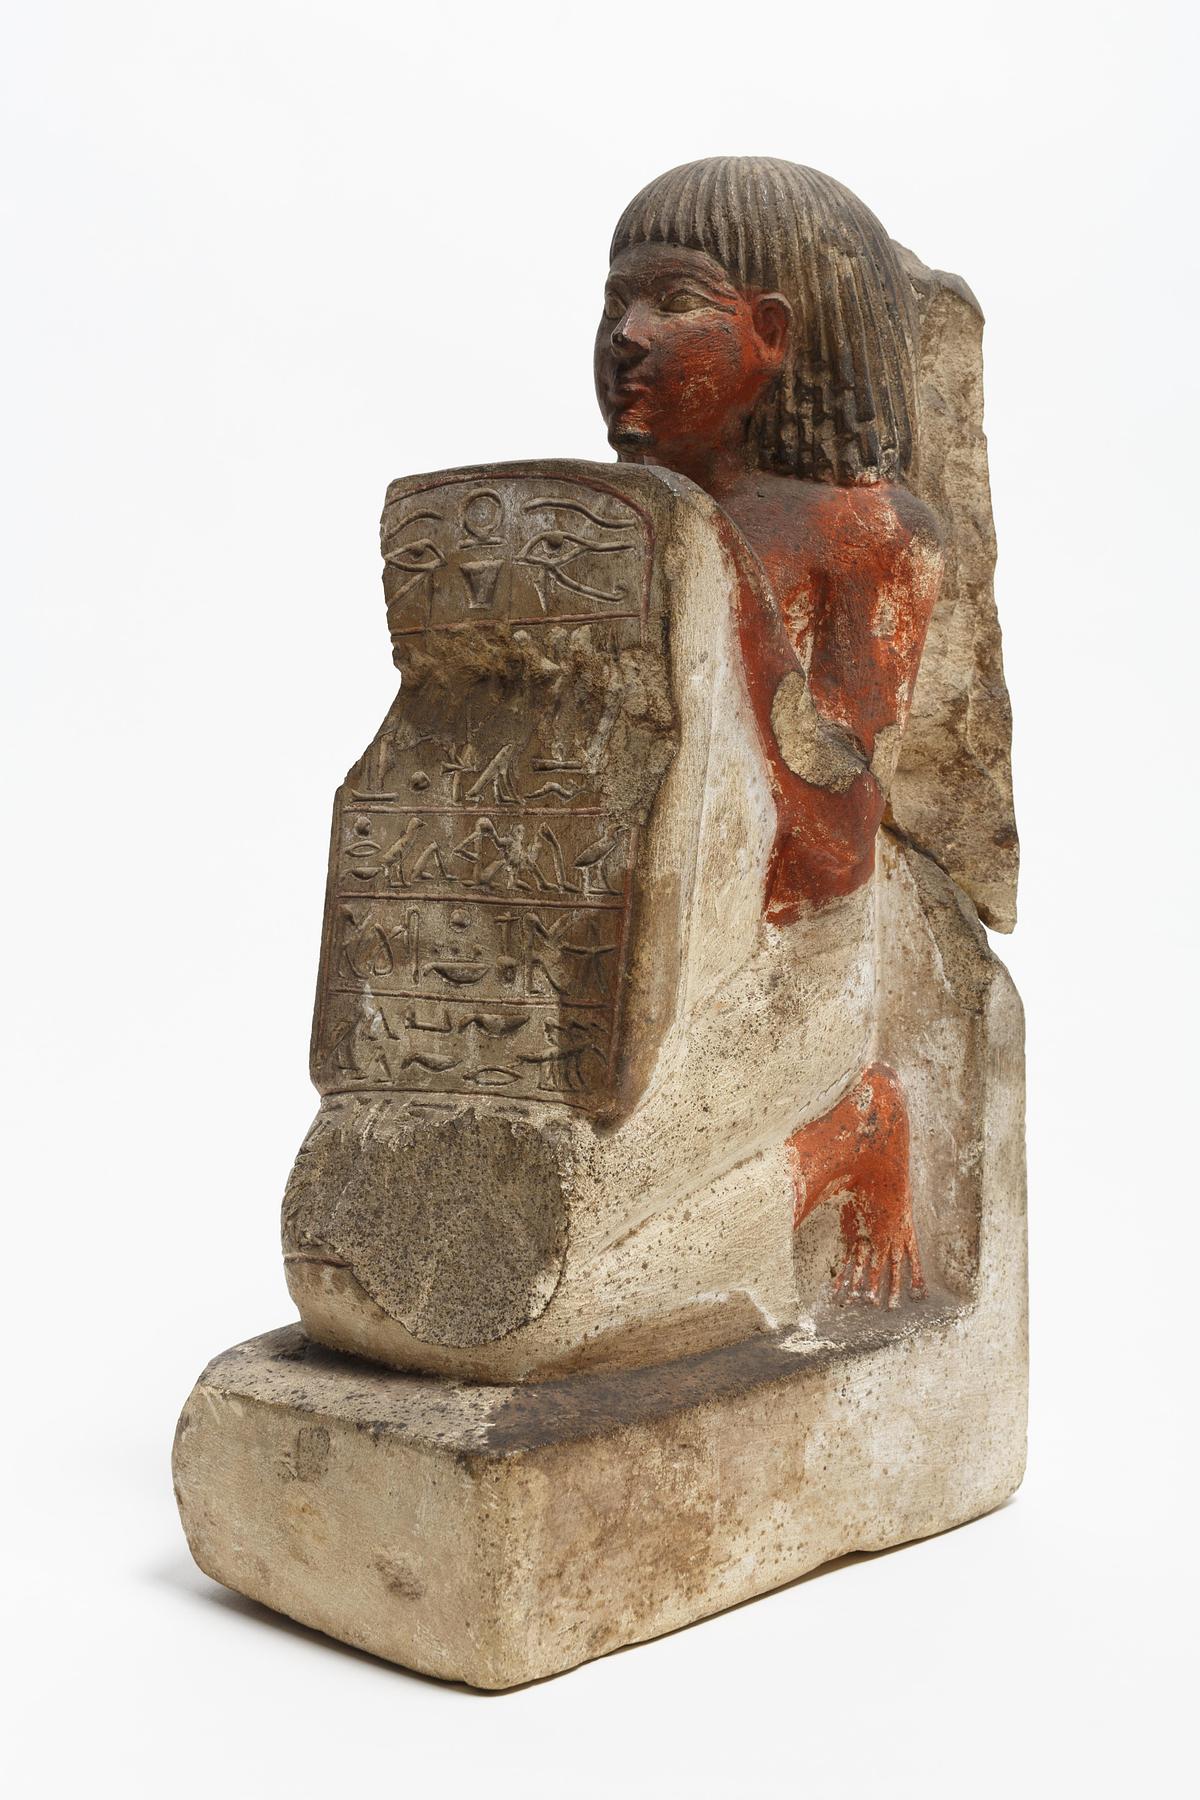 Statuette of a kneeling man with a stele, H355